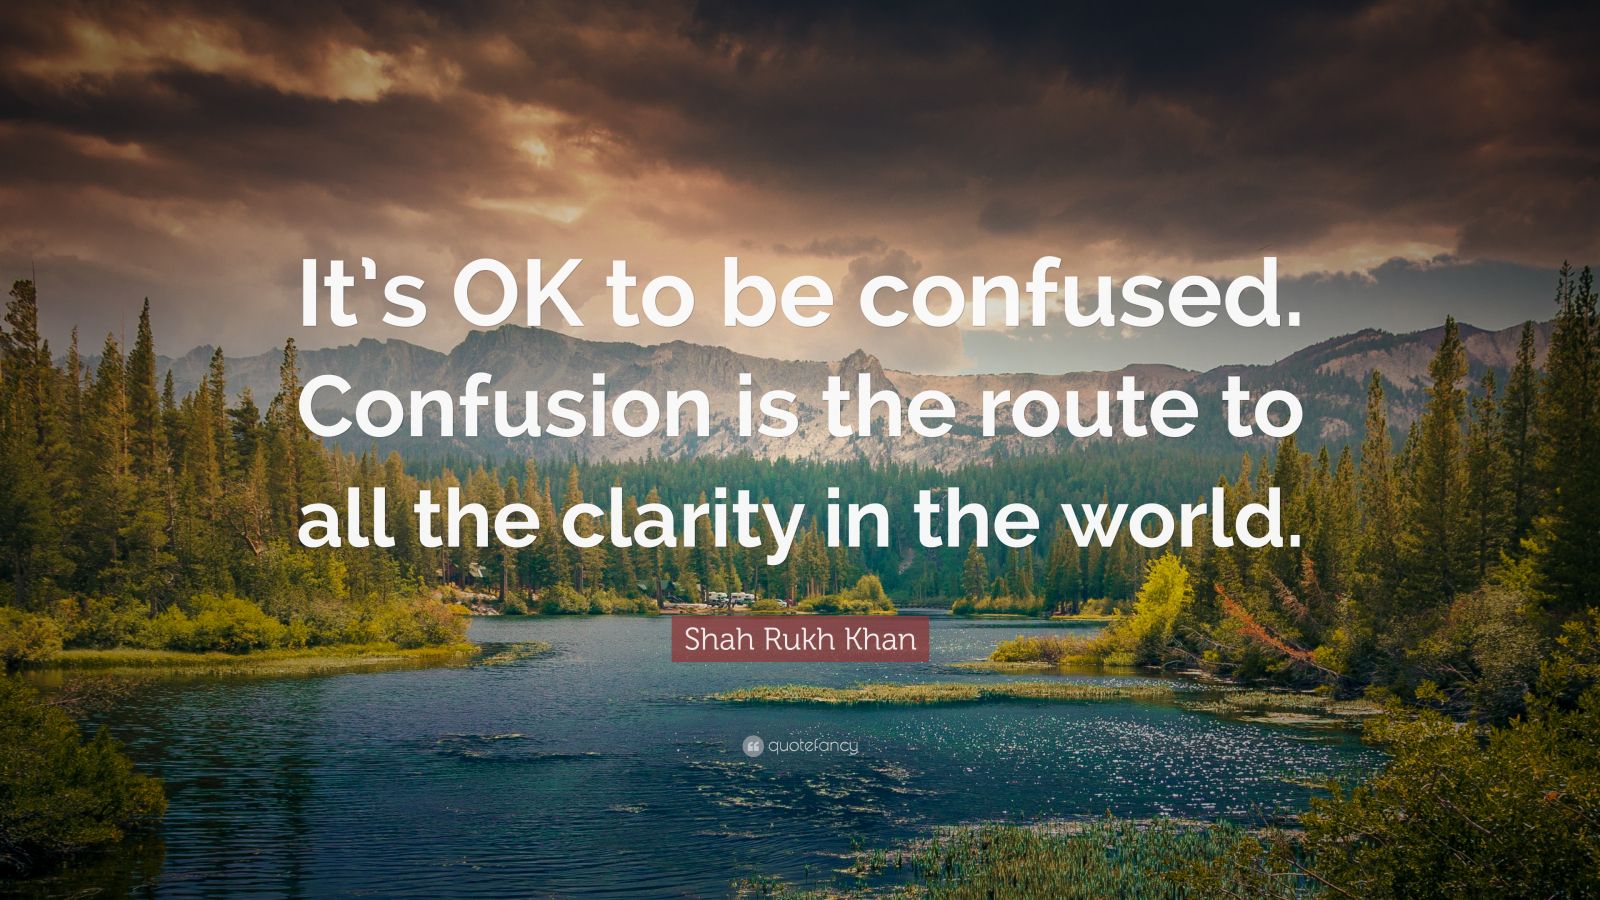 Shah Rukh Khan Quote: “It’s OK to be confused. Confusion is the route ...